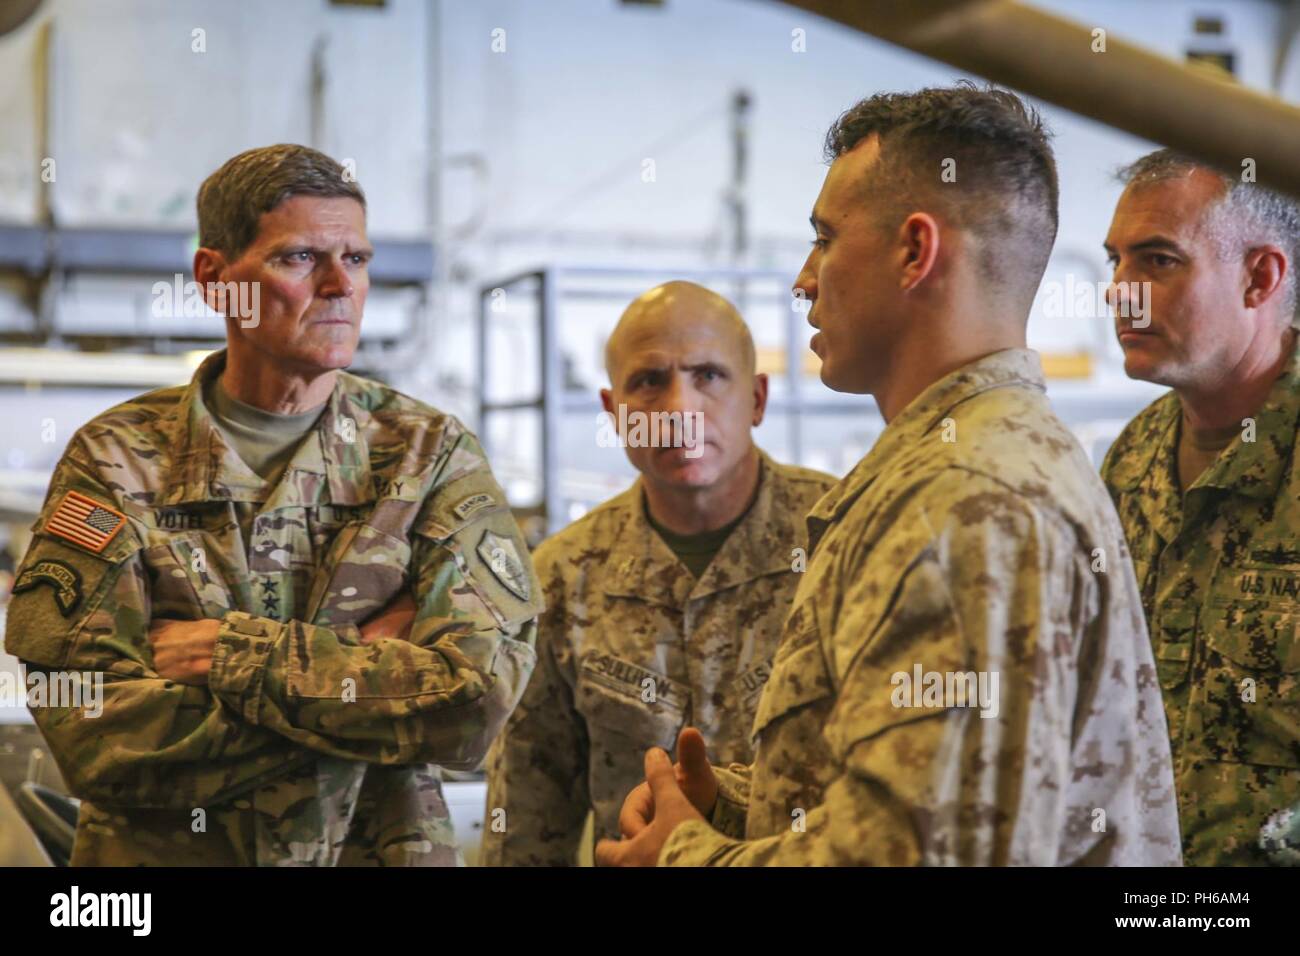 ARABIAN GULF (June 22, 2018) U.S. Army Gen. Joseph Votel, commander, U.S. Central Command,  speaks with U.S. Marine Corps Sgt. Mason McLaughlin aboard the Wasp-class amphibious assault ship USS Iwo Jima (LHD 7), June 22, 2018. Votel, Vice Adm. Scott Stearney, commander, U.S. Naval Forces Central Command, and other distinguished visitors took a tour of Iwo Jima and spoke with crew members and Marines with the 26th Marine Expeditionary Unit, who are currently deployed to the U.S. 5th Fleet of operations in support of maritime security operations to reassure allies and partners and preserve the f Stock Photo